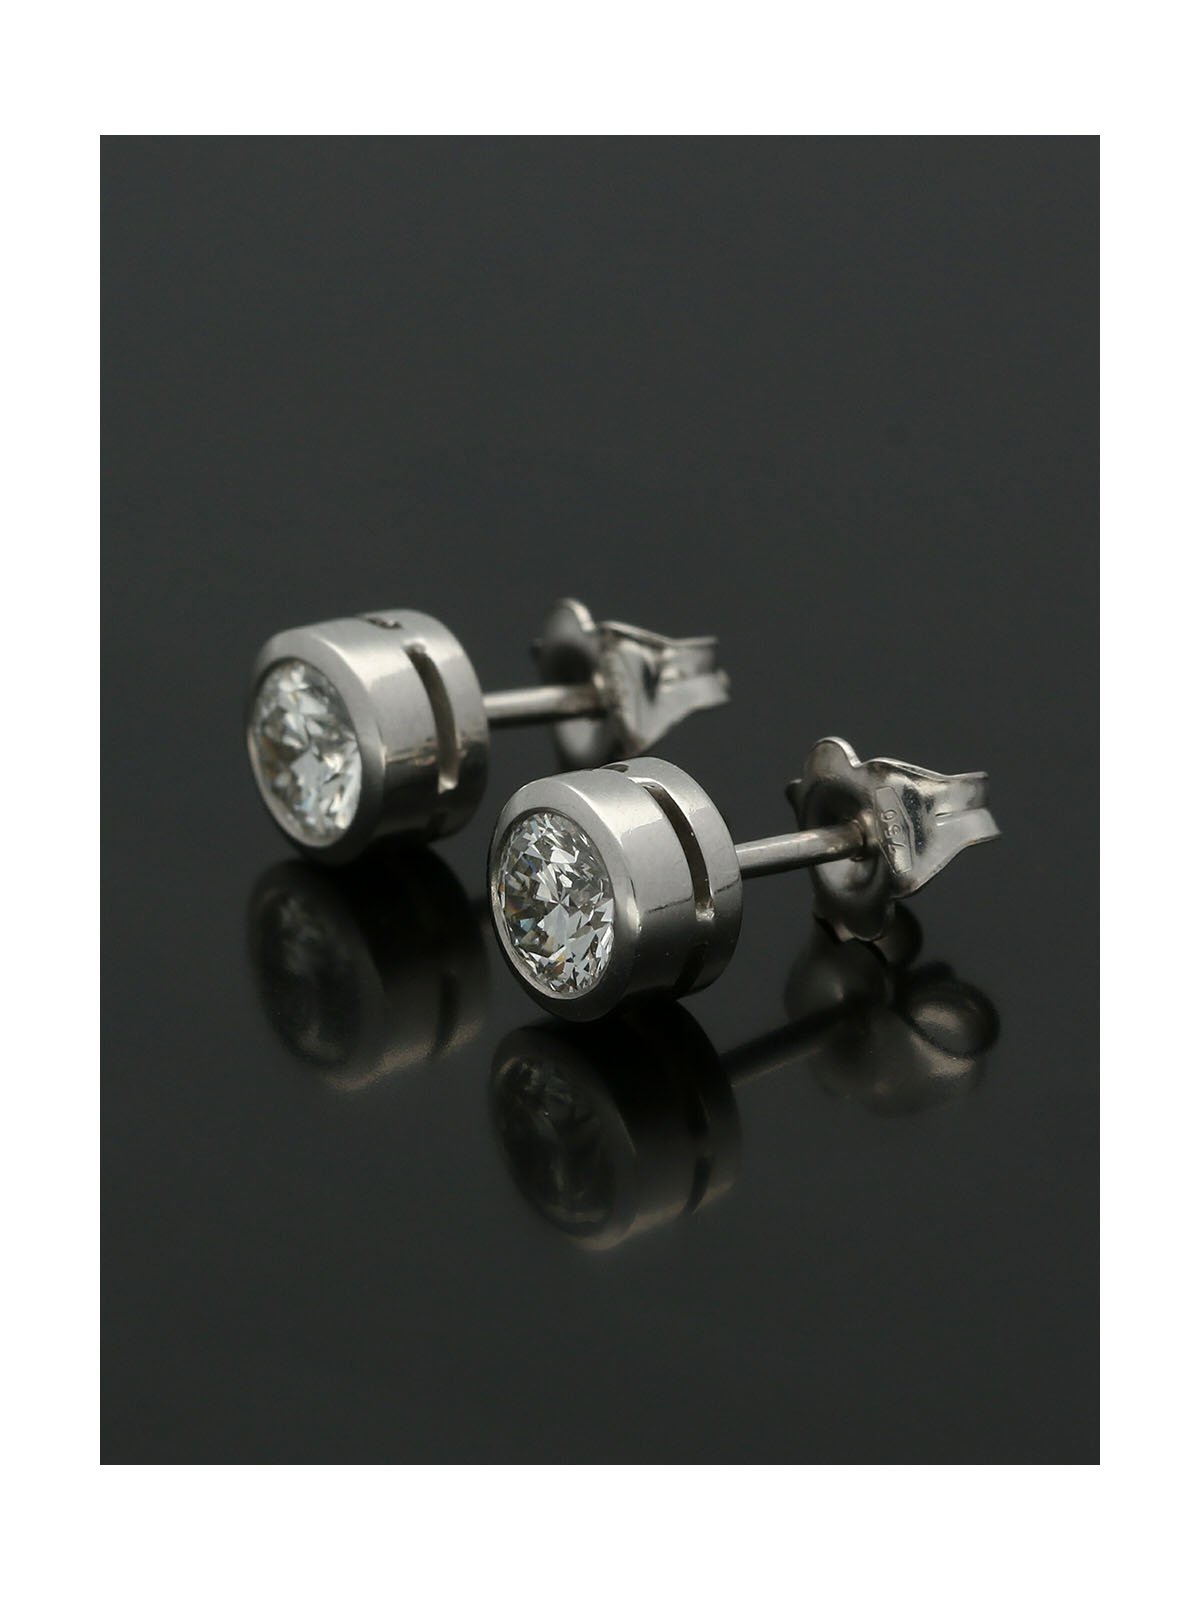 Diamond Solitaire Stud Earrings "The Diana Collection" 0.80ct Round Brilliant Cut in 18ct White Gold